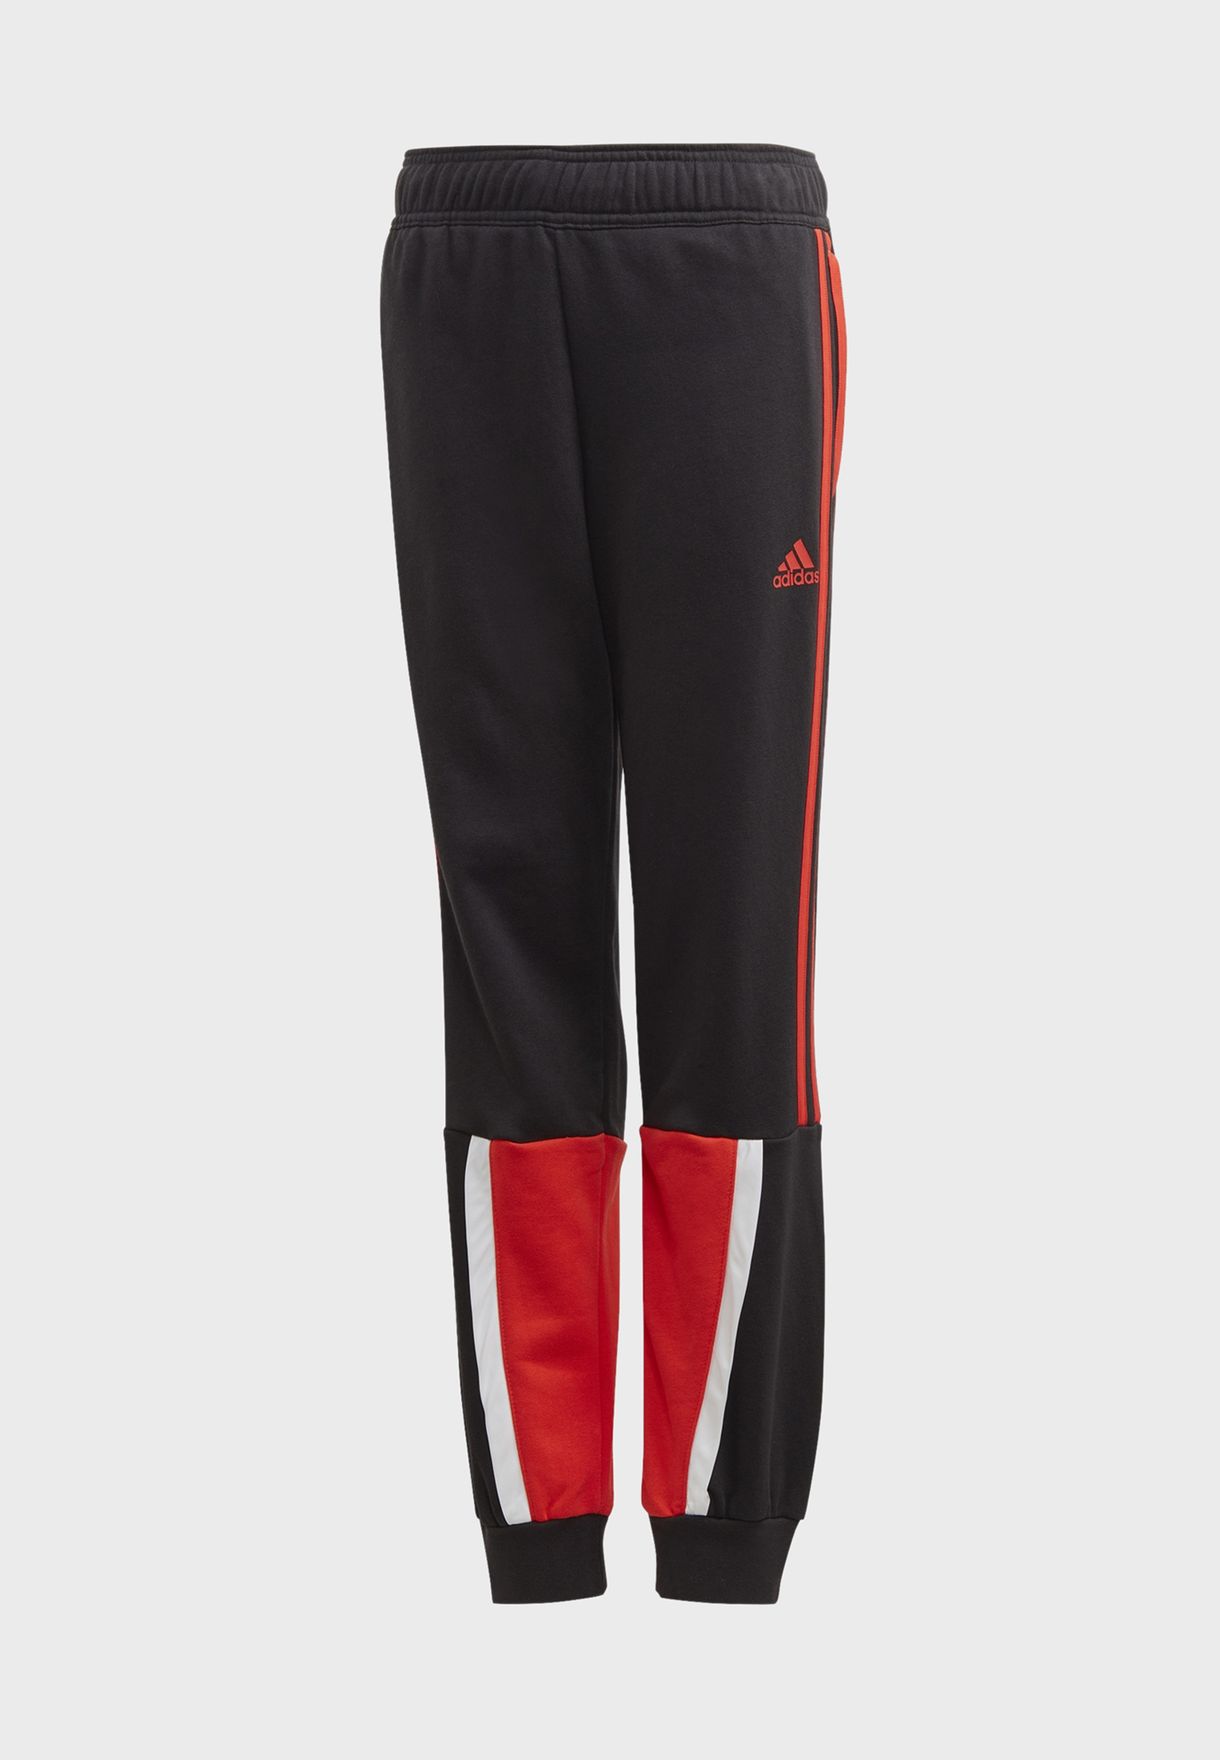 adidas sweatpants black with red stripes